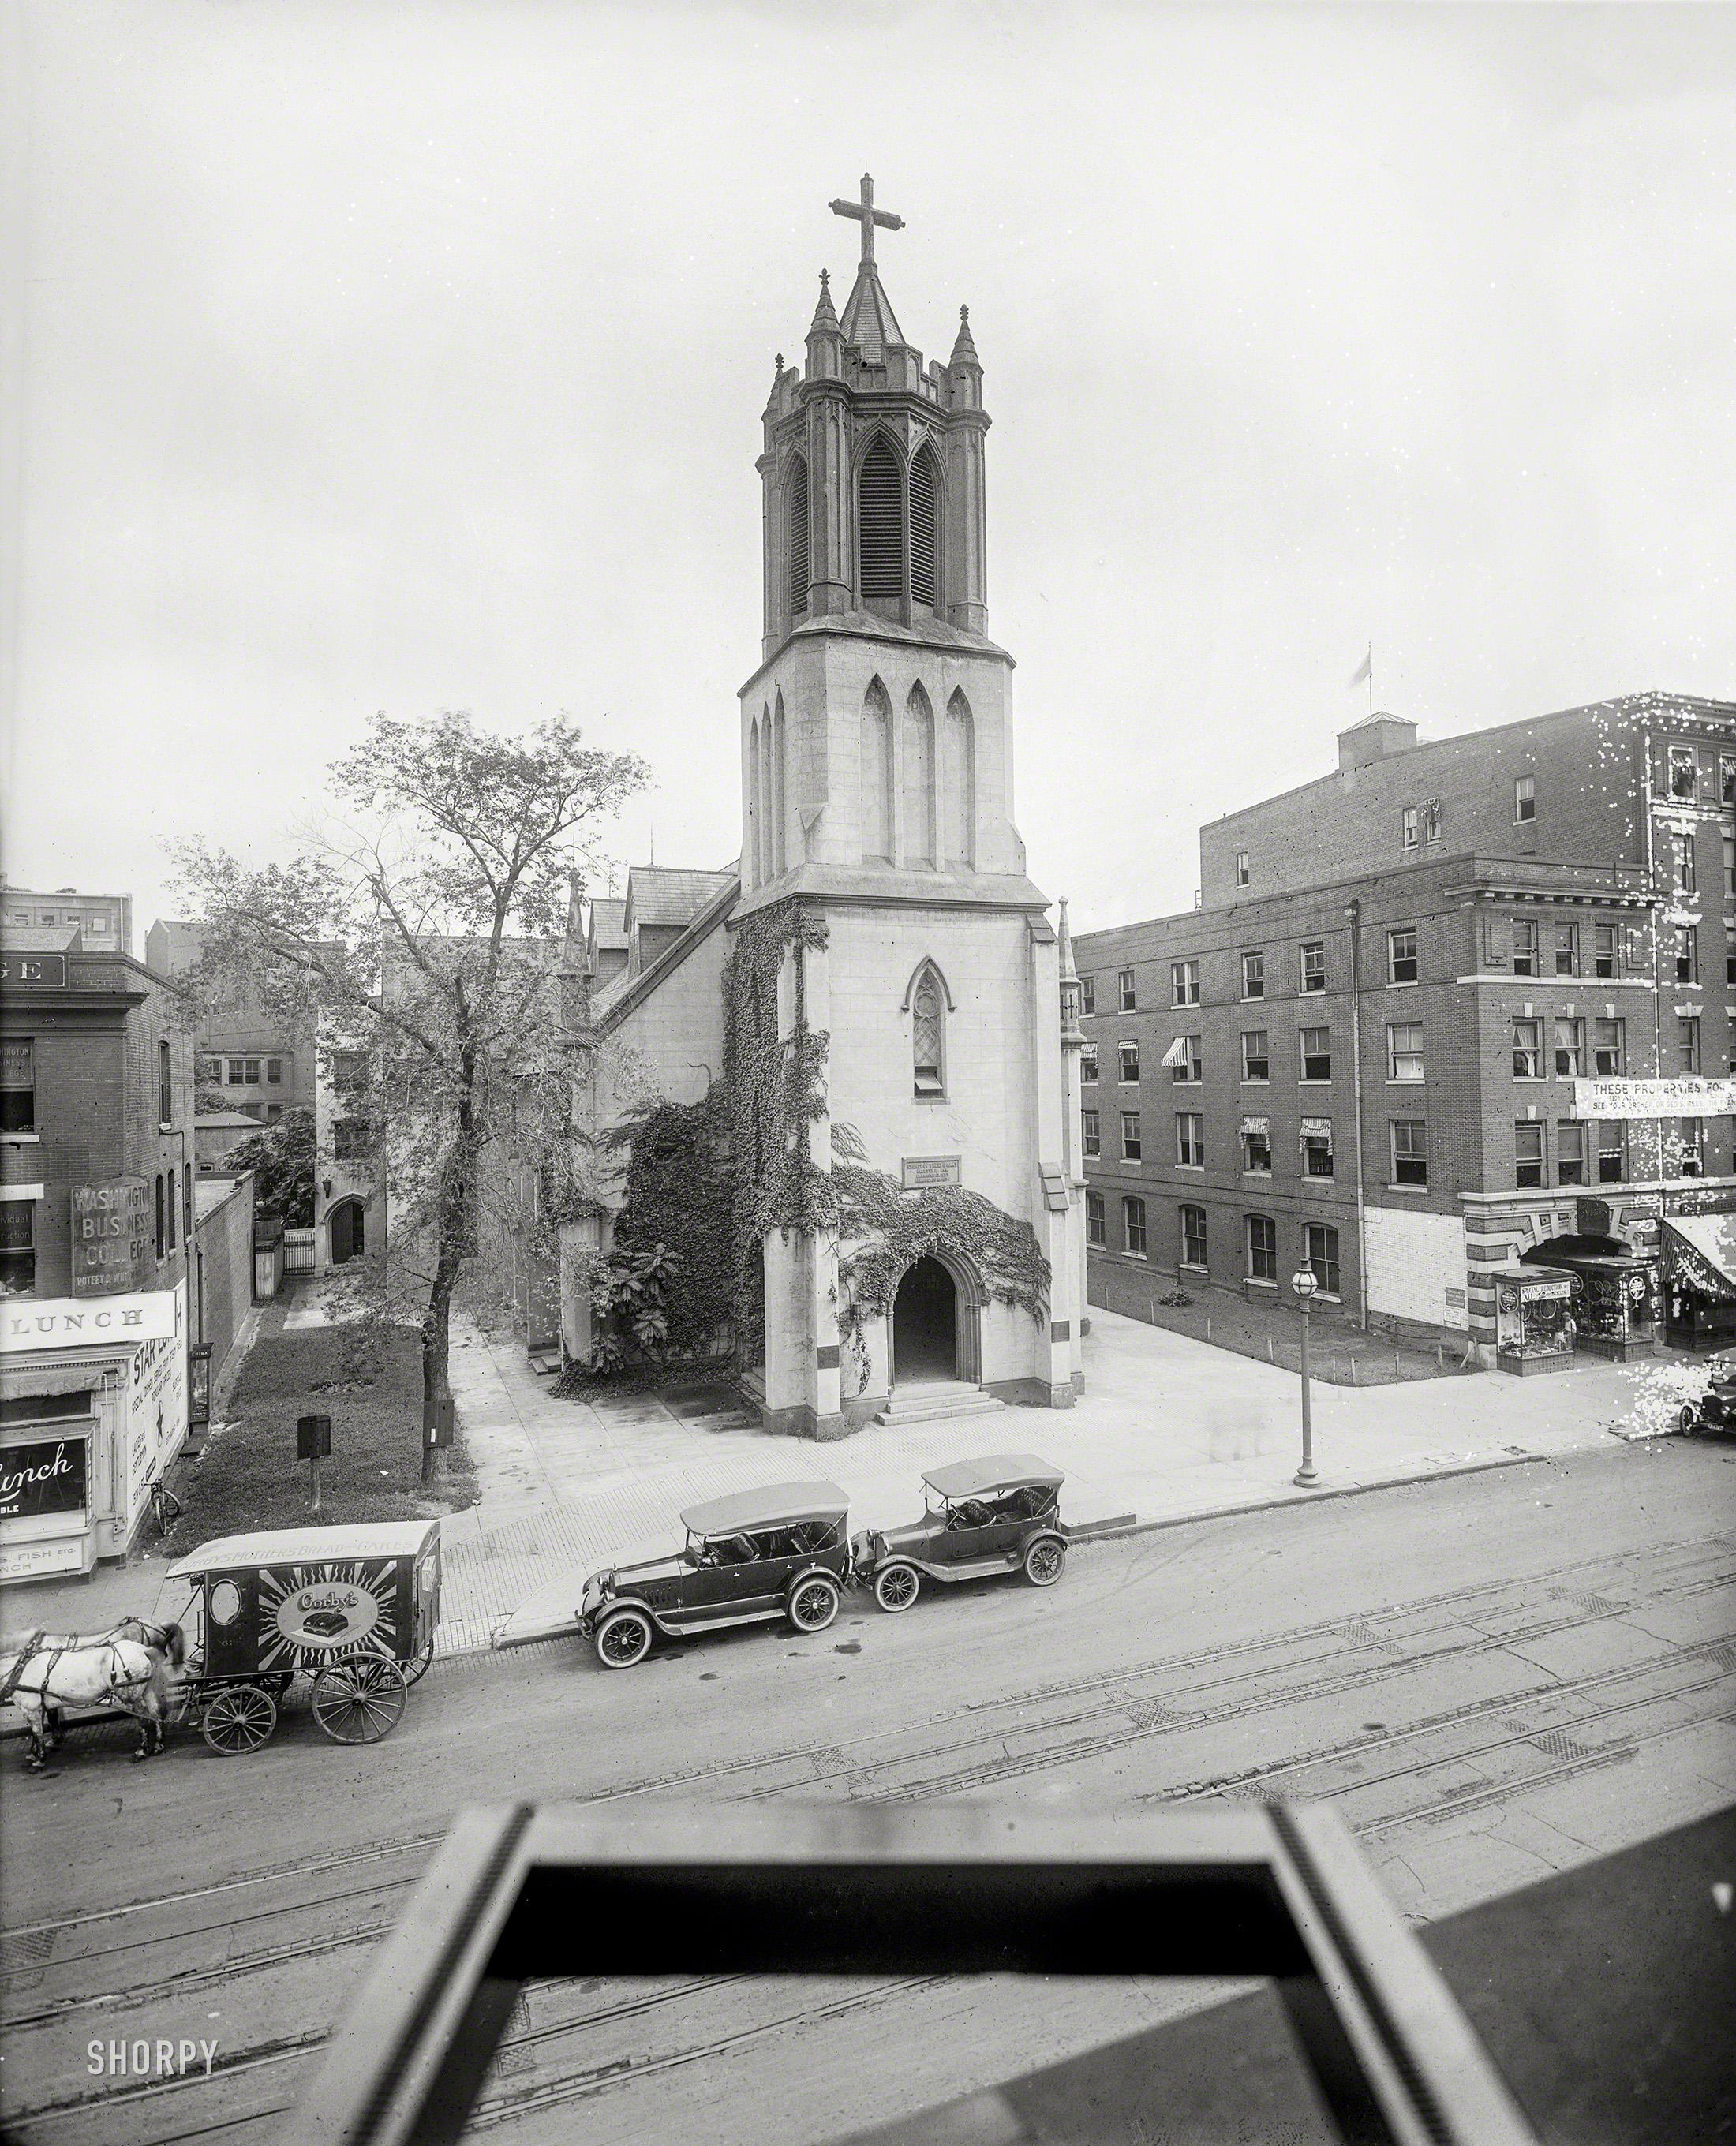 Washington, D.C., circa 1920. "Epiphany Church." With Star Lunch on the left and a mold invasion on the right. National Photo glass negative. View full size.